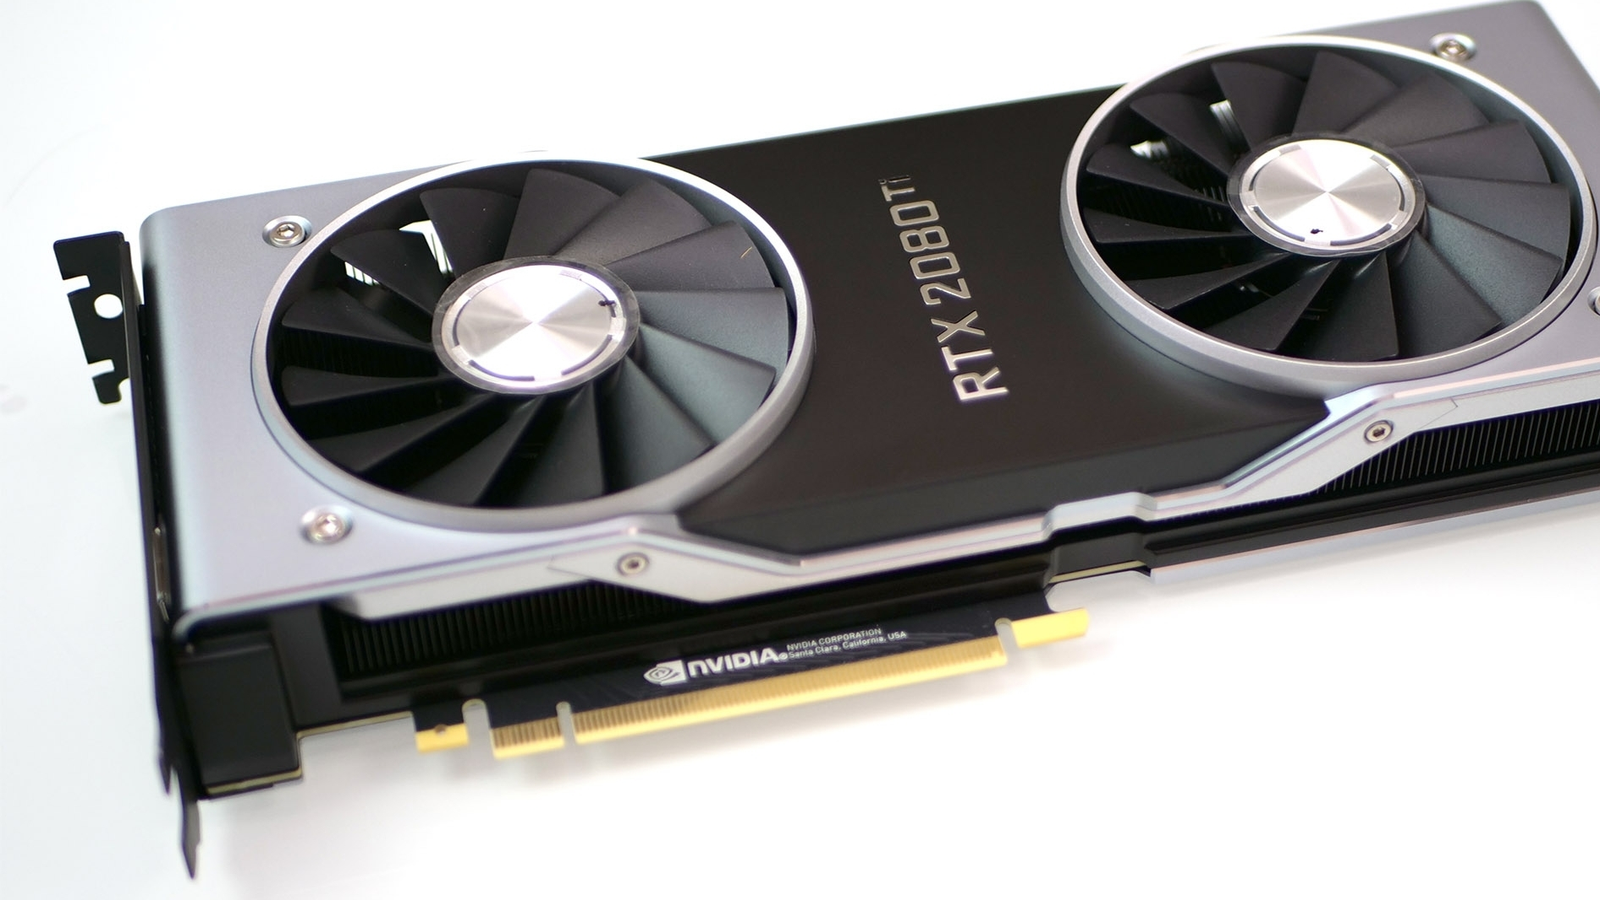 Nvidia's Newest Graphics Card, the GeForce GT 730, is Super Affordable